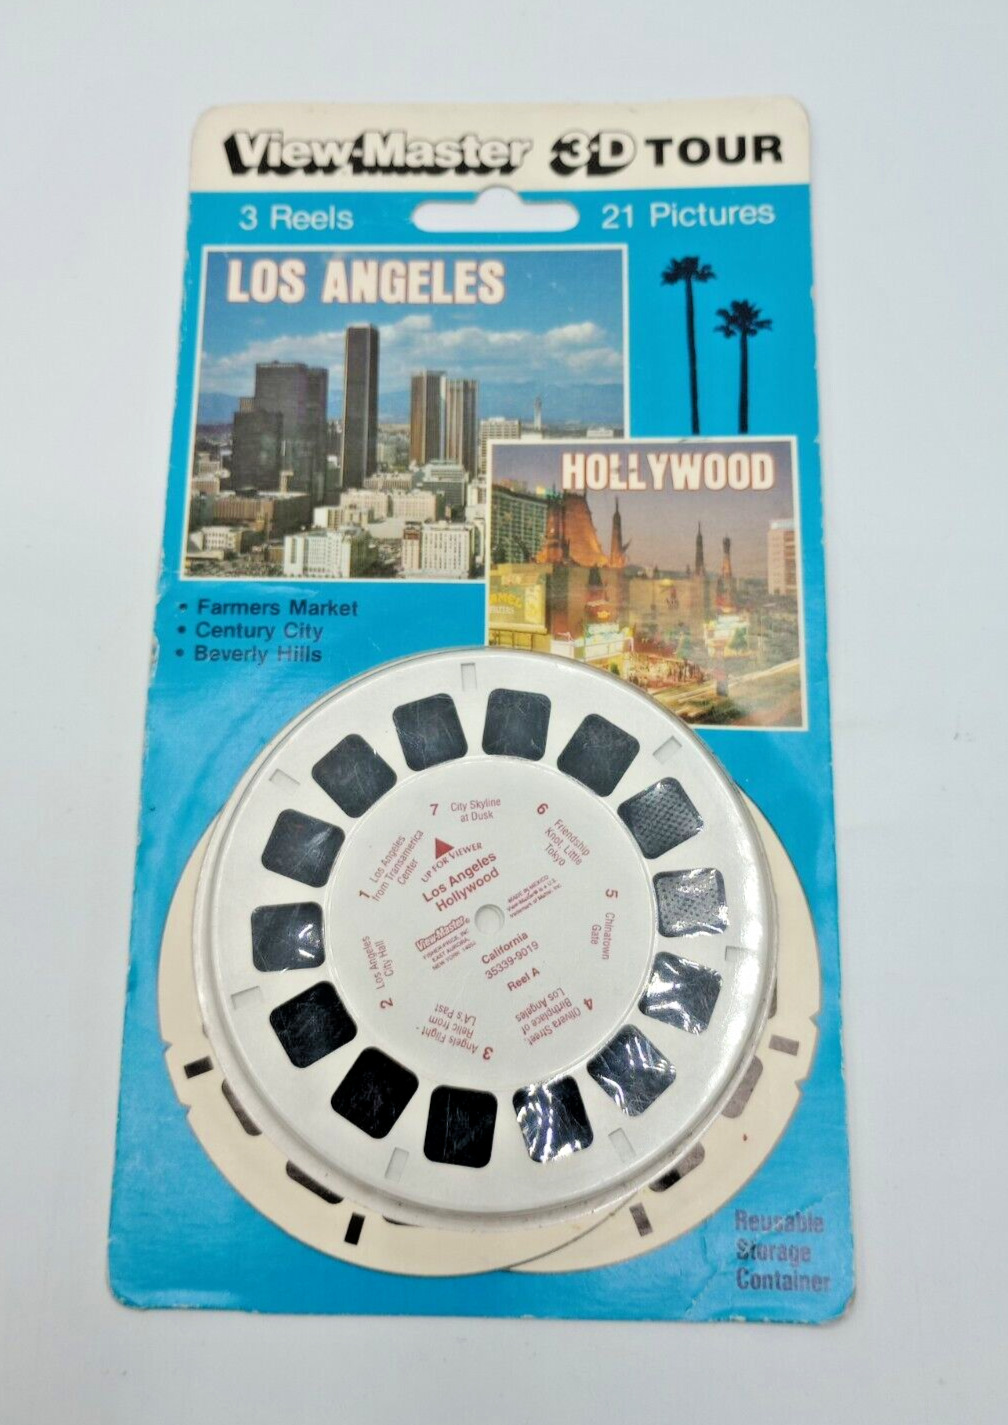 View Master 3-D Tour Los Angeles And Hollywood California - NEW SEALED